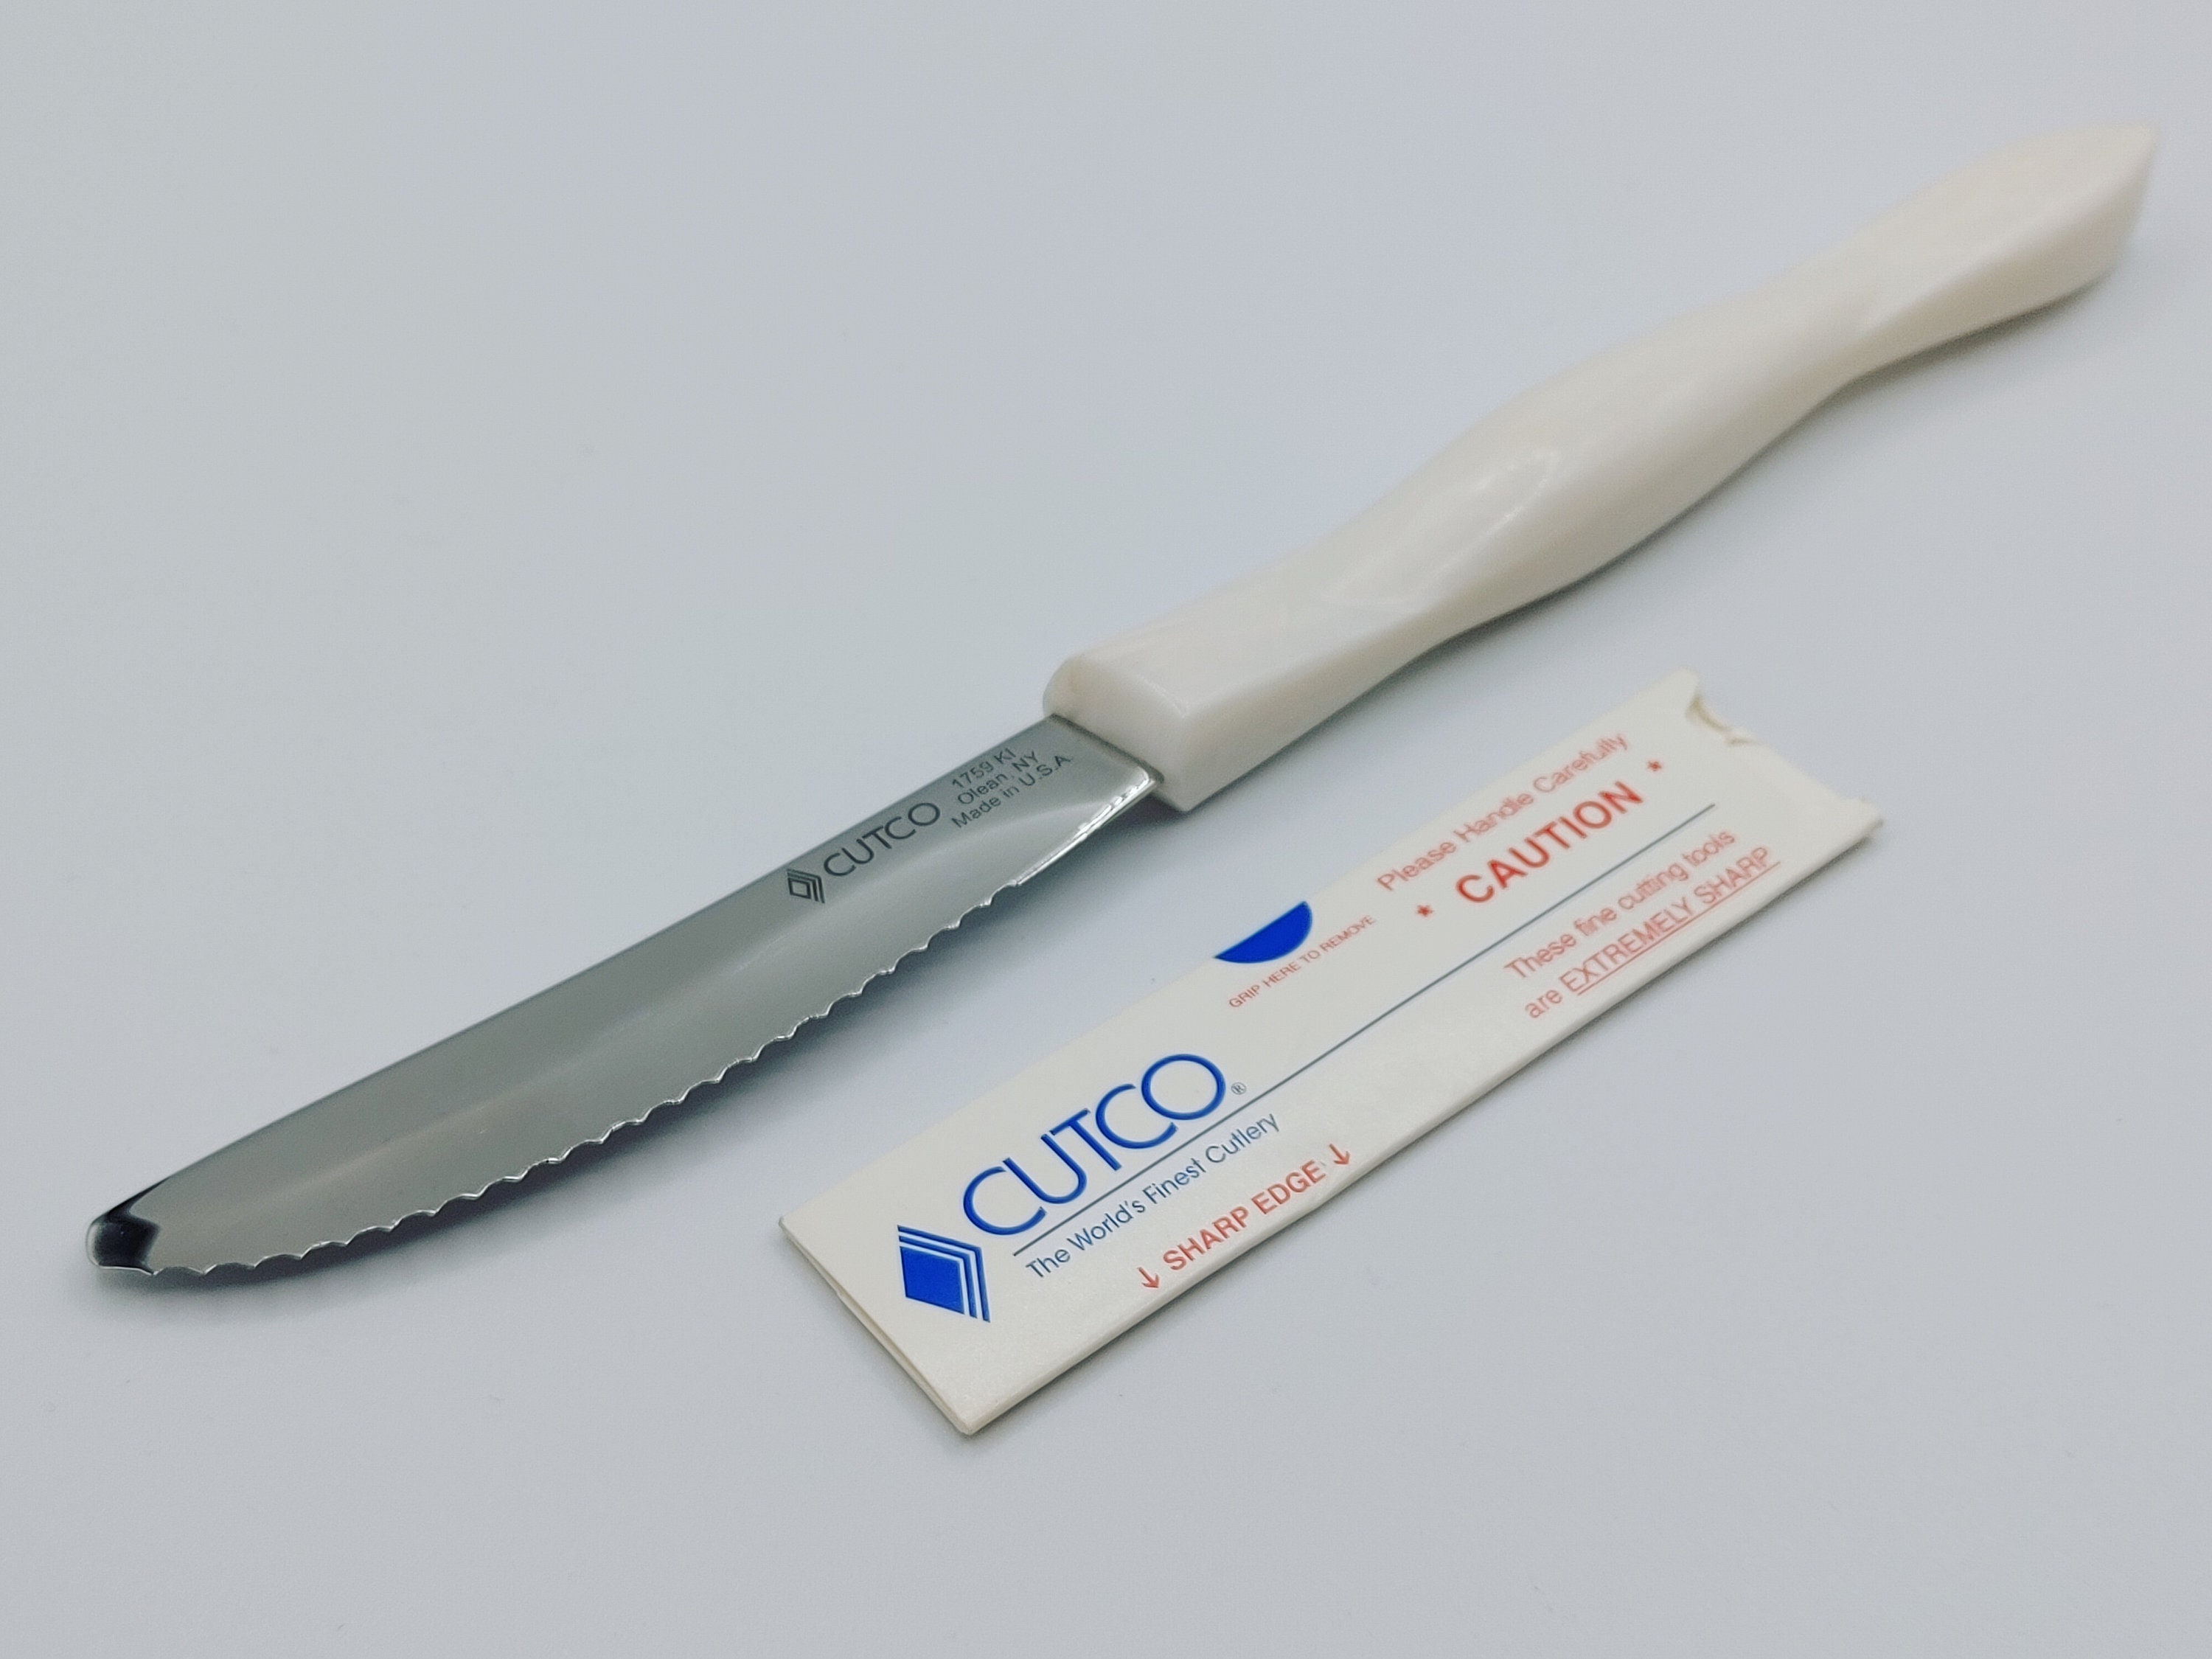 We know it can be tough to be without your beloved Cutco knives